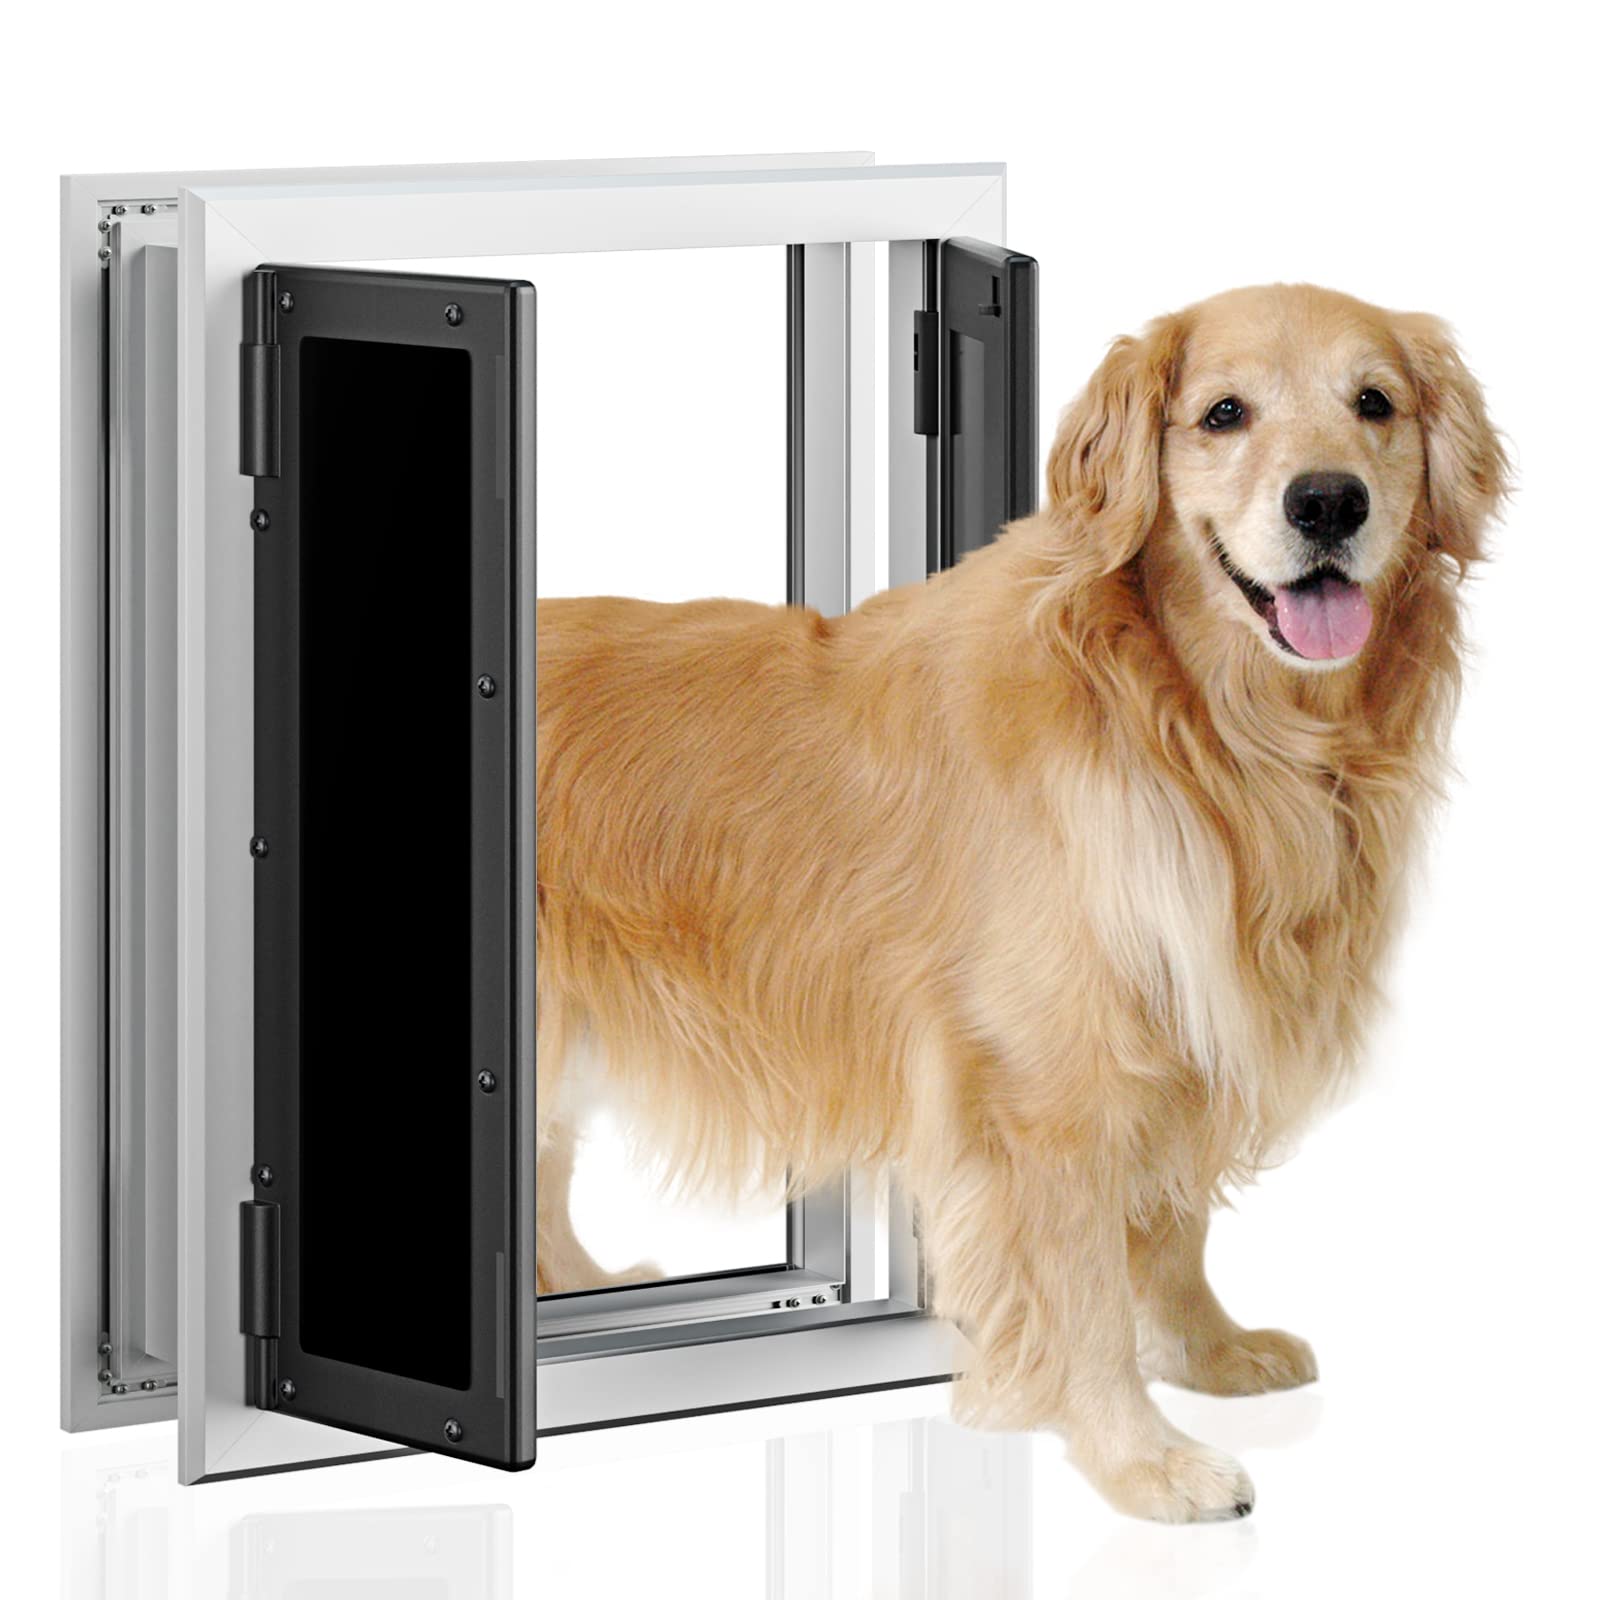 Petouch Premium Large Dog Door, PETOUcH Aluminum Pet Door with Double Panels, Doggie Door with Automatic closing Magnetic Flaps, Slide-i